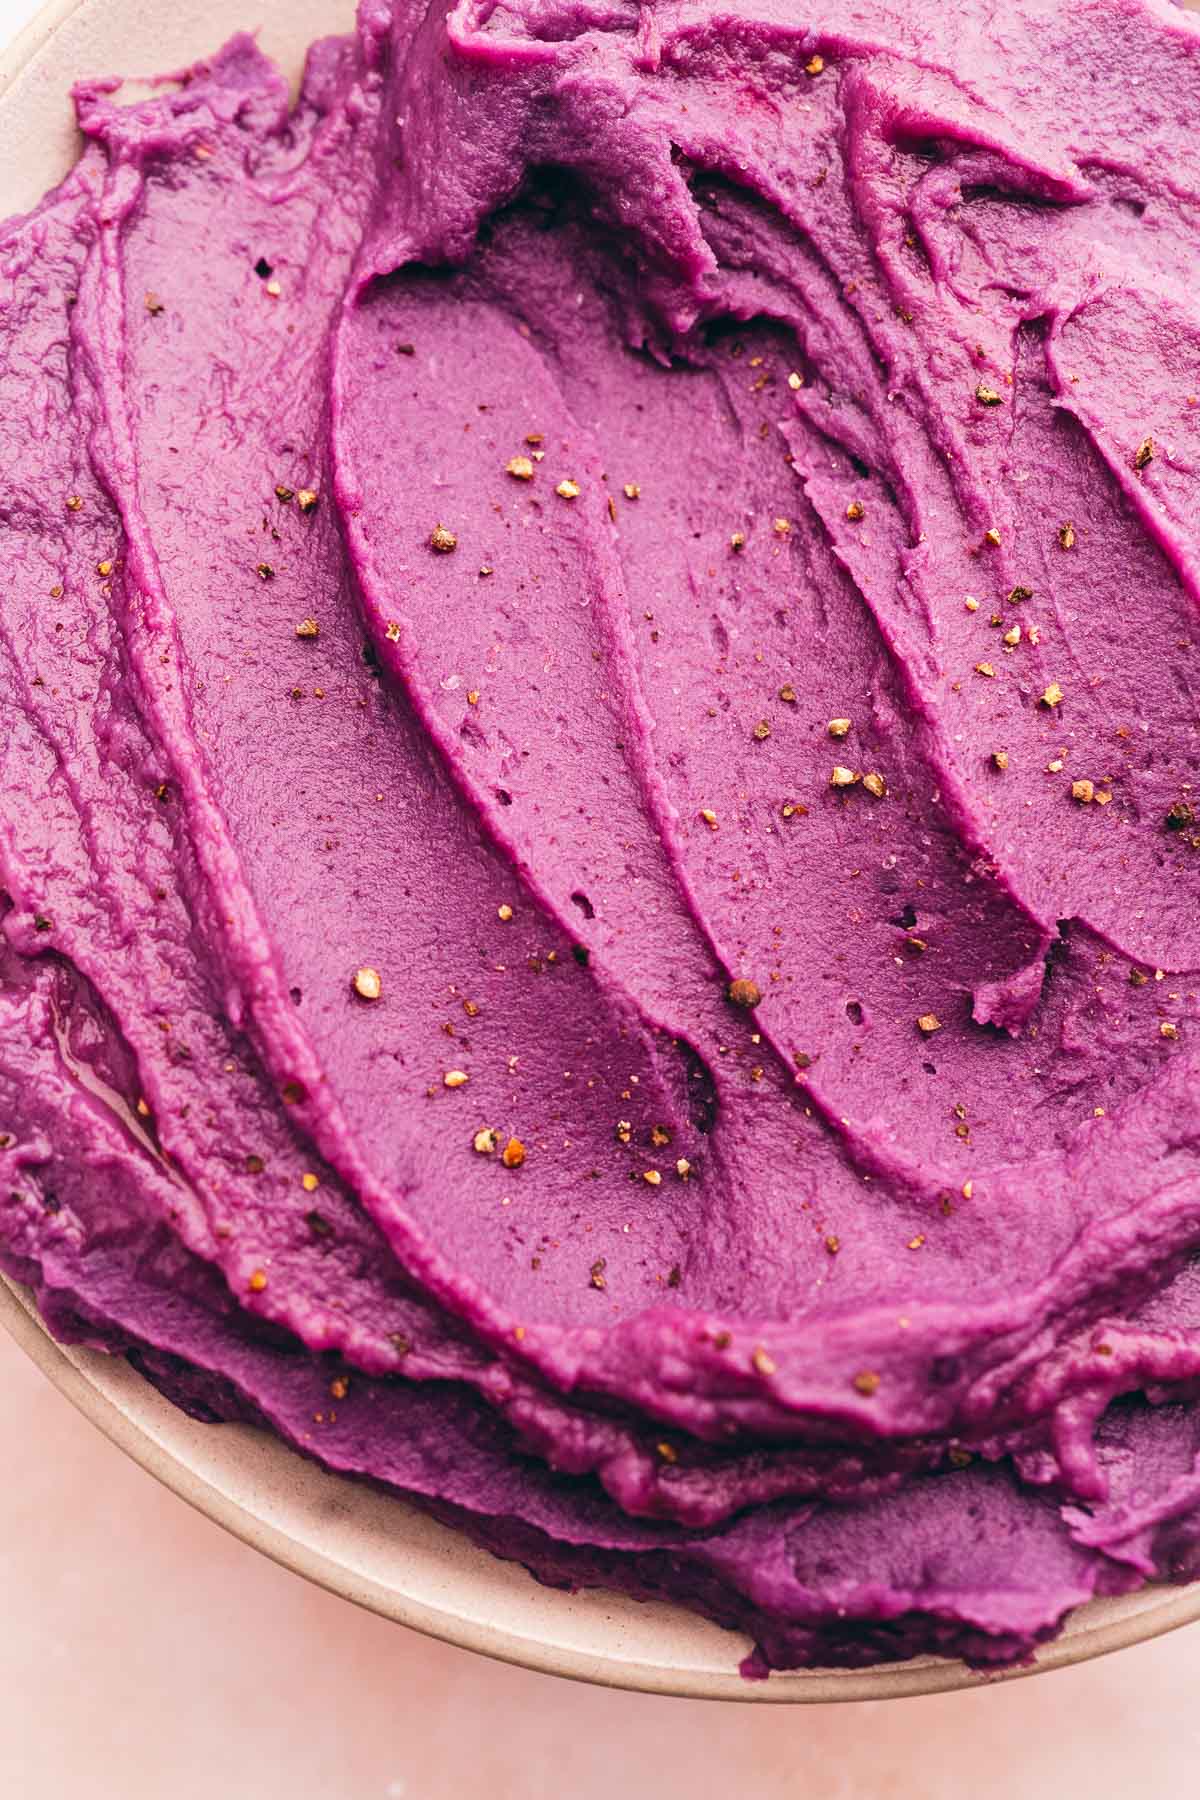 Mashed purple sweet potatoes ice cream in a bowl with gold sprinkles.